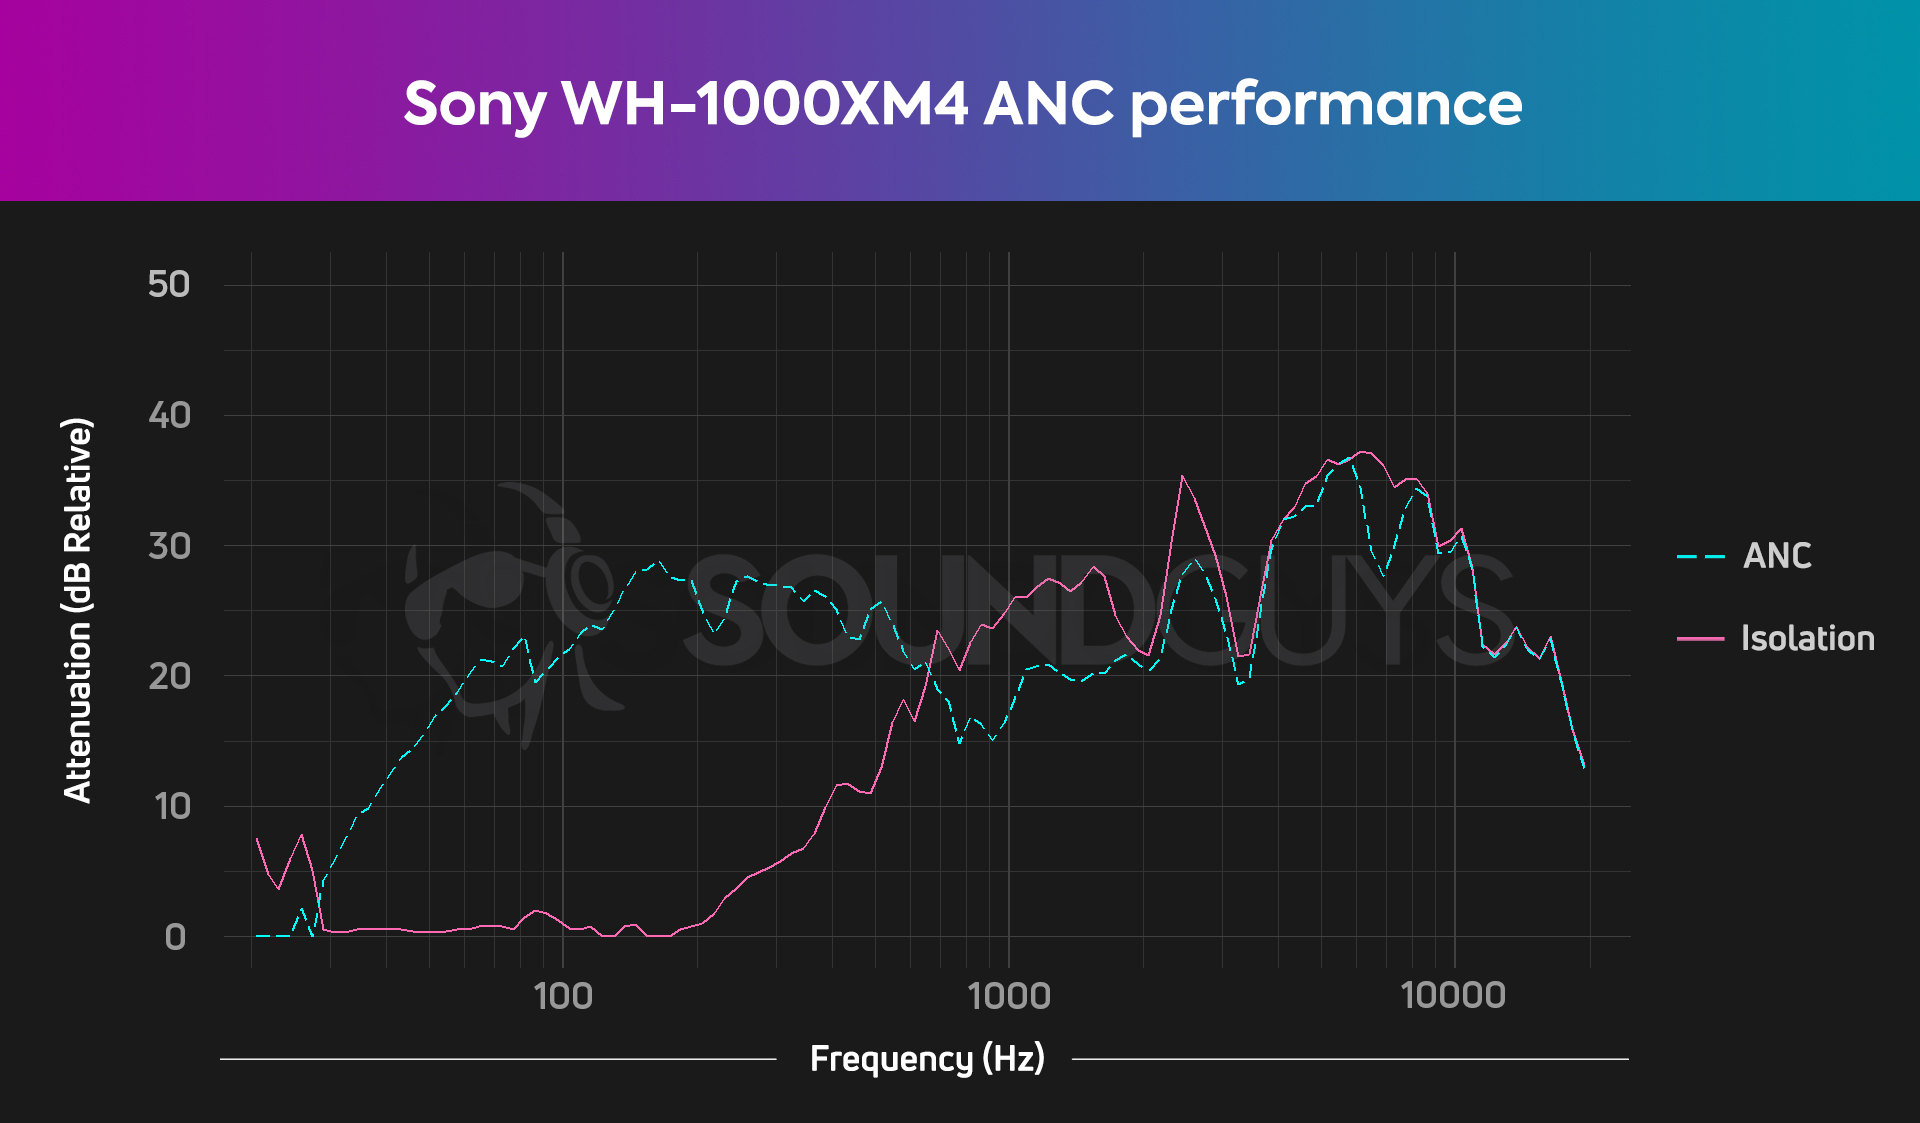  A chart showing that the active noise canceling performance of the Sony WH-1000XM4 is very good